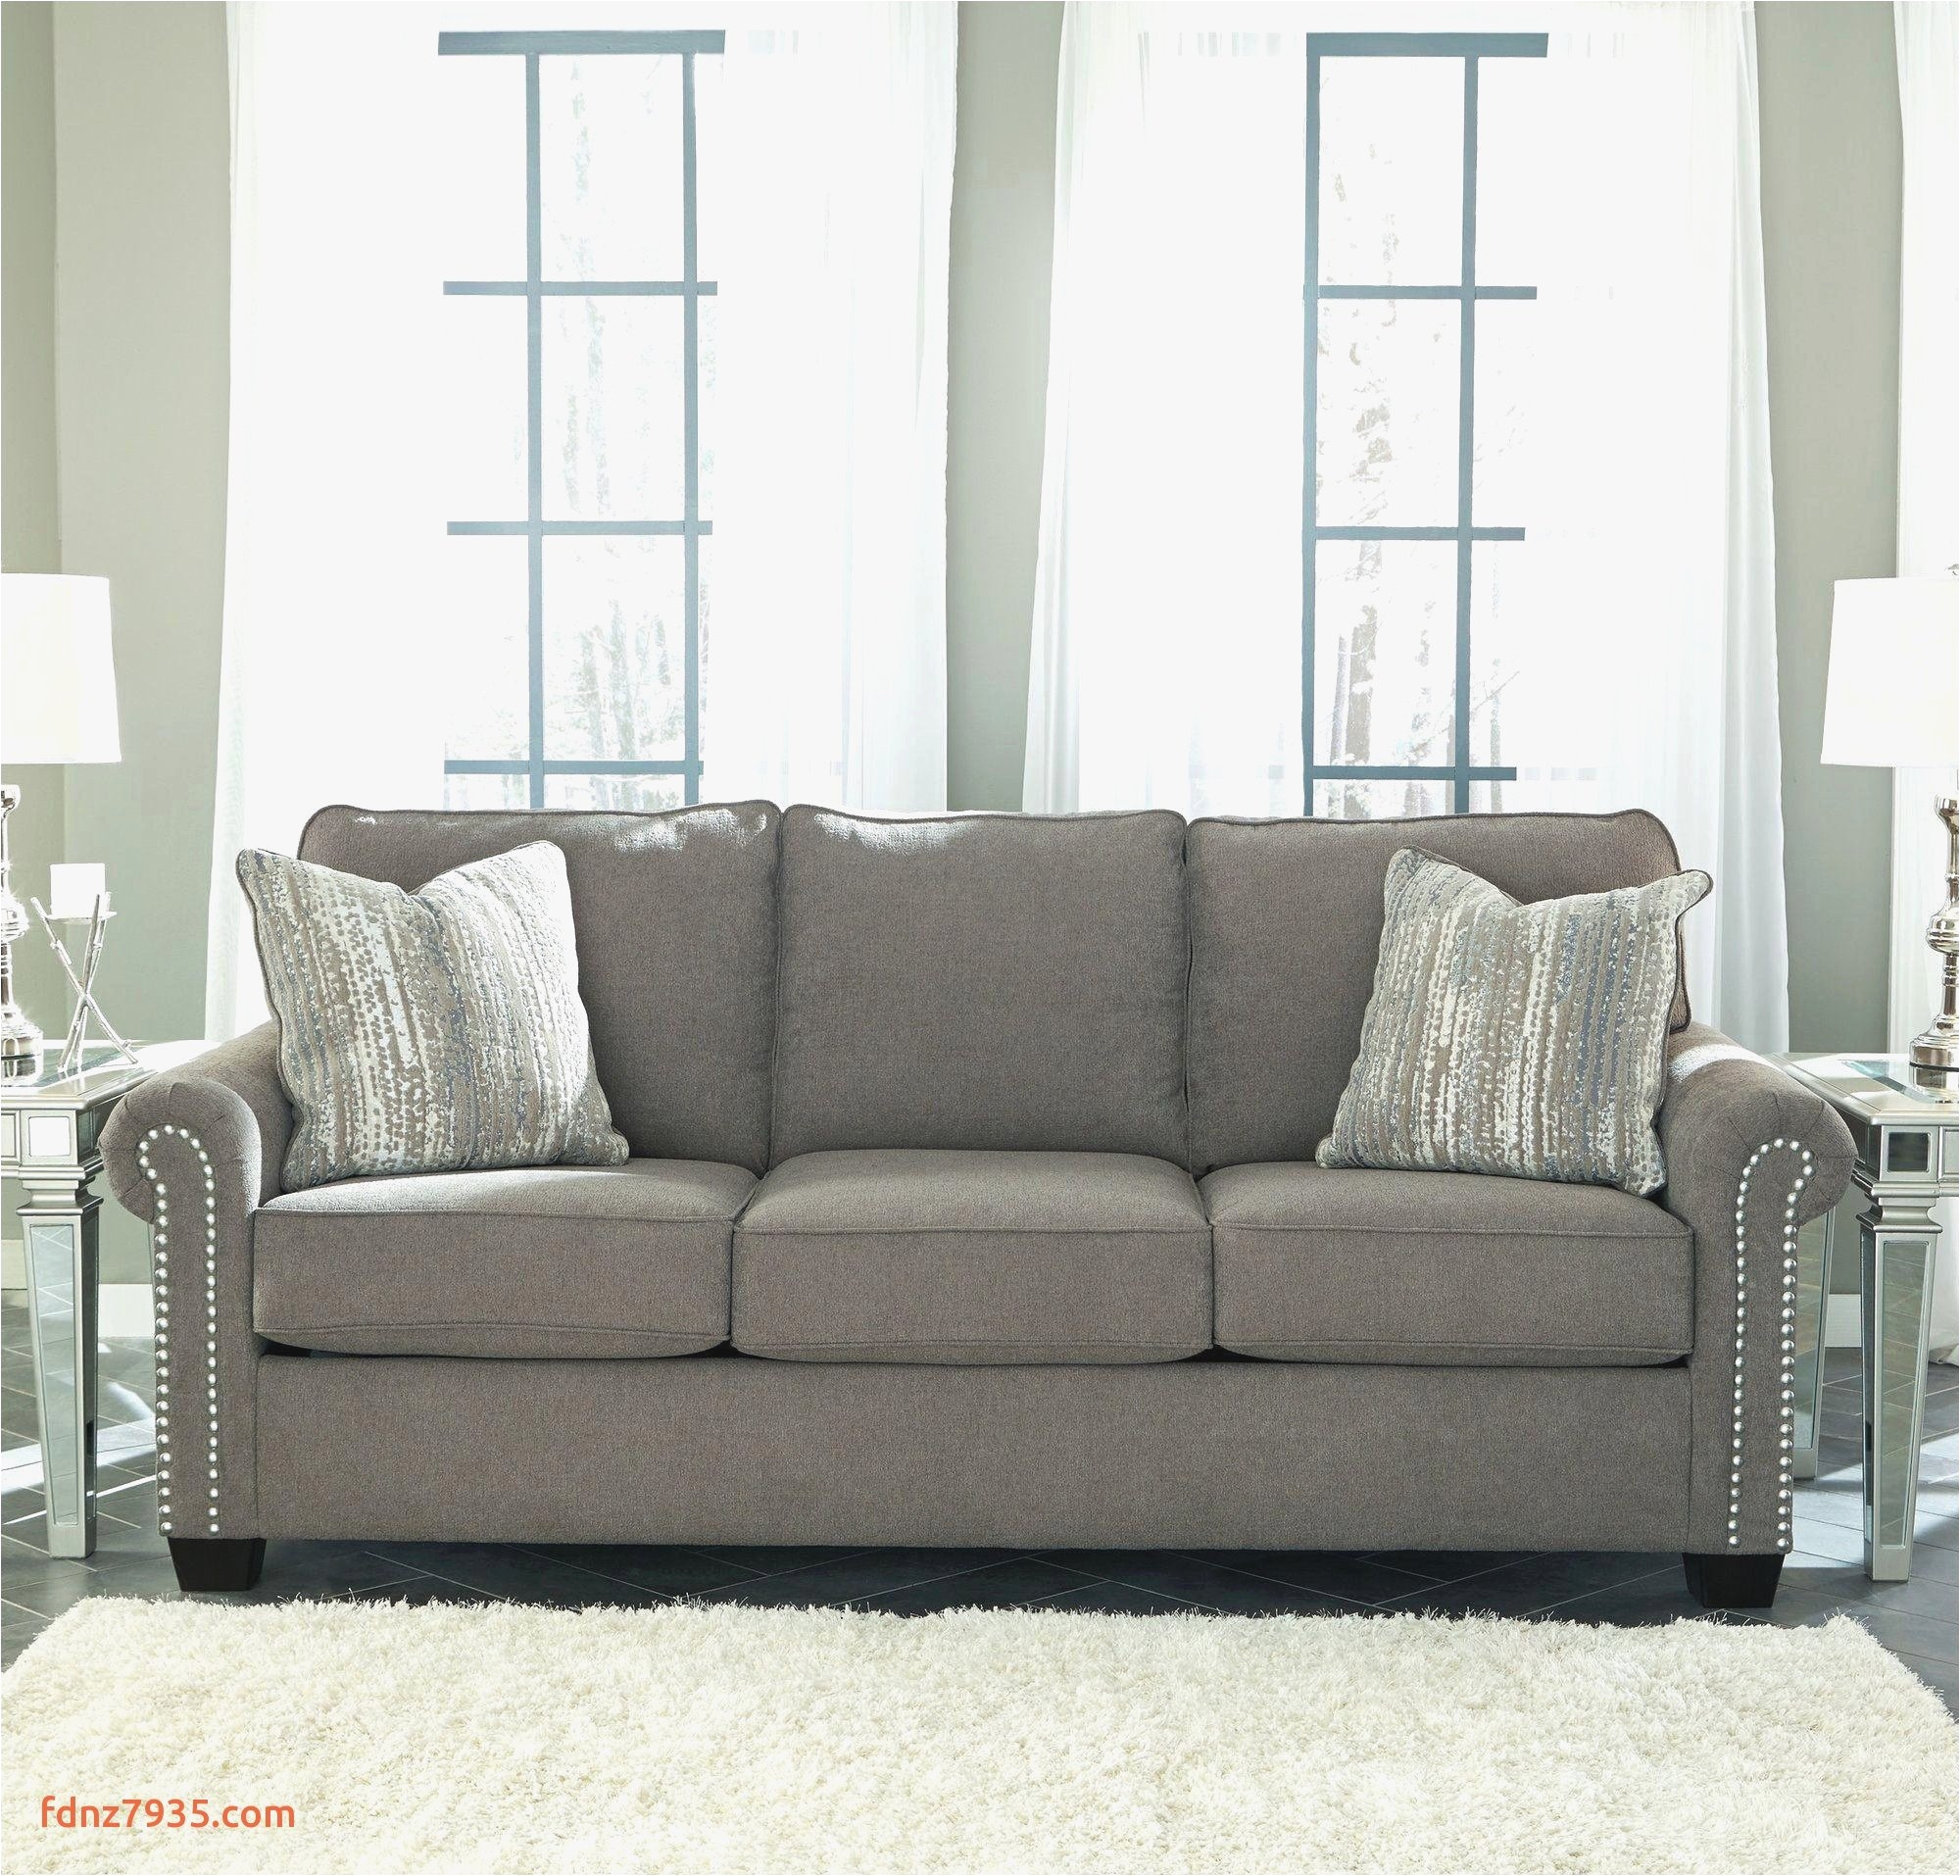 elegant living room furniture unique furniture pull out couch elegant davenport couch 0d tags amazing of